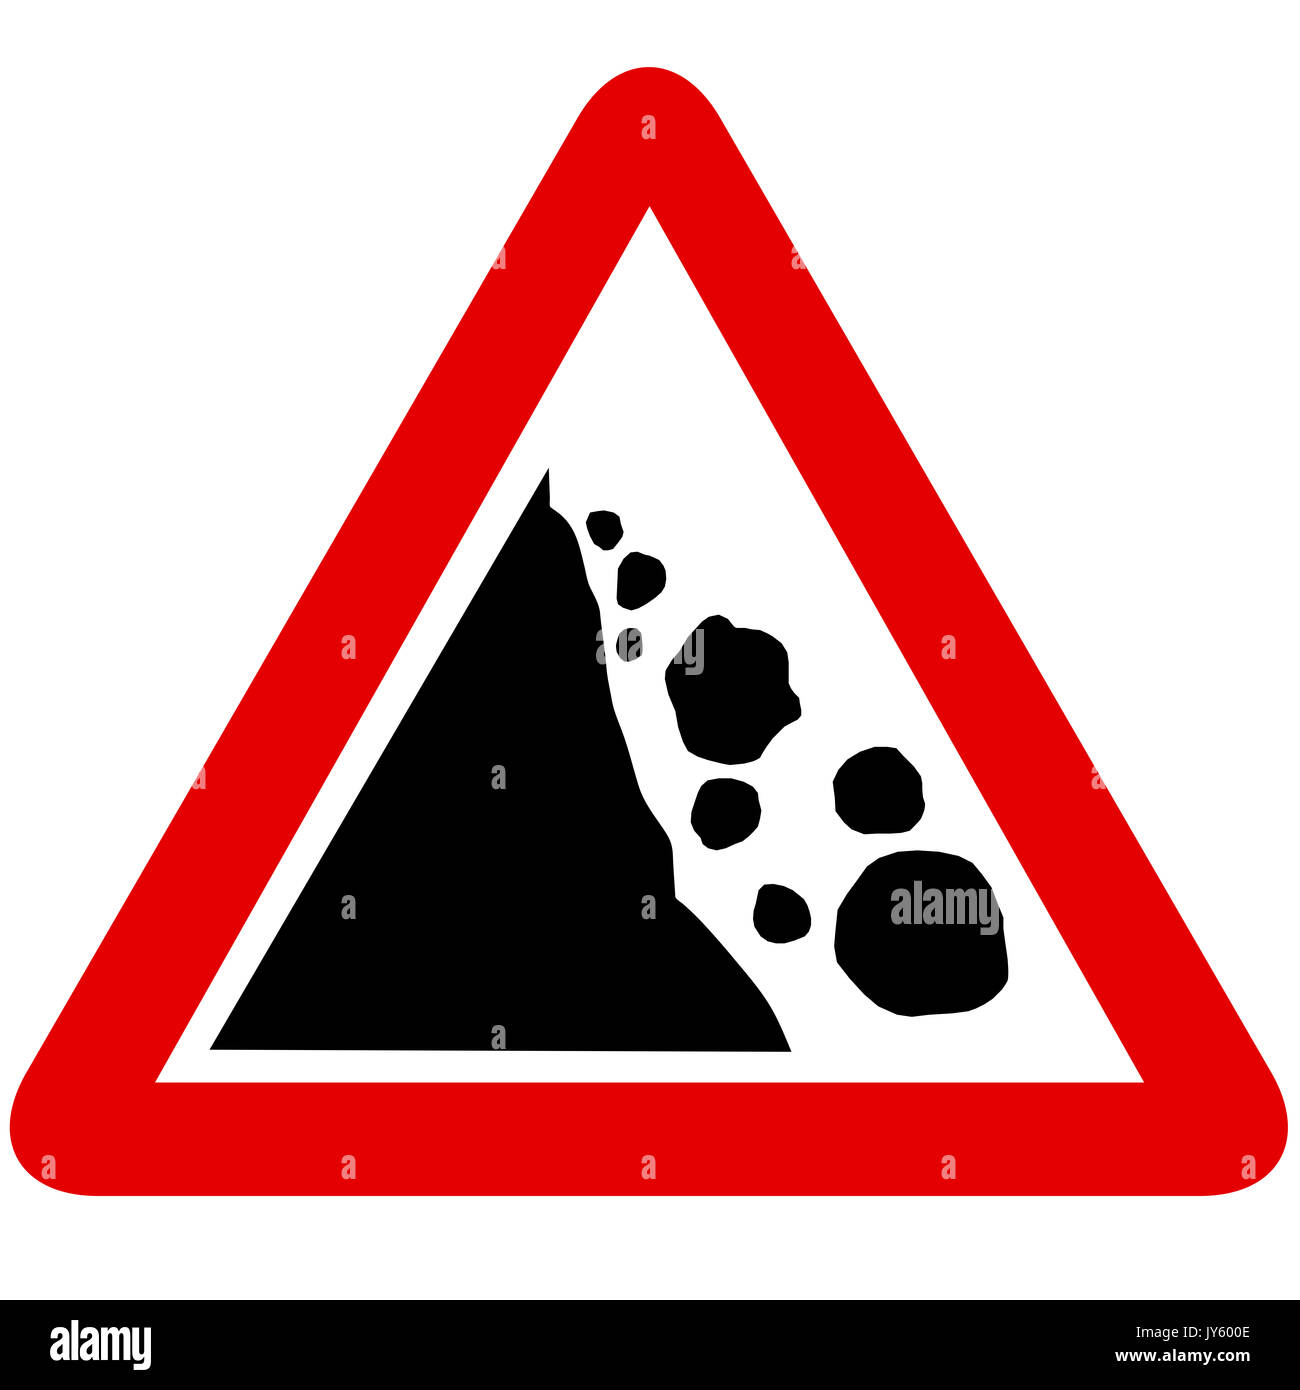 Falling or fallen rocks road sign on white background Stock Photo